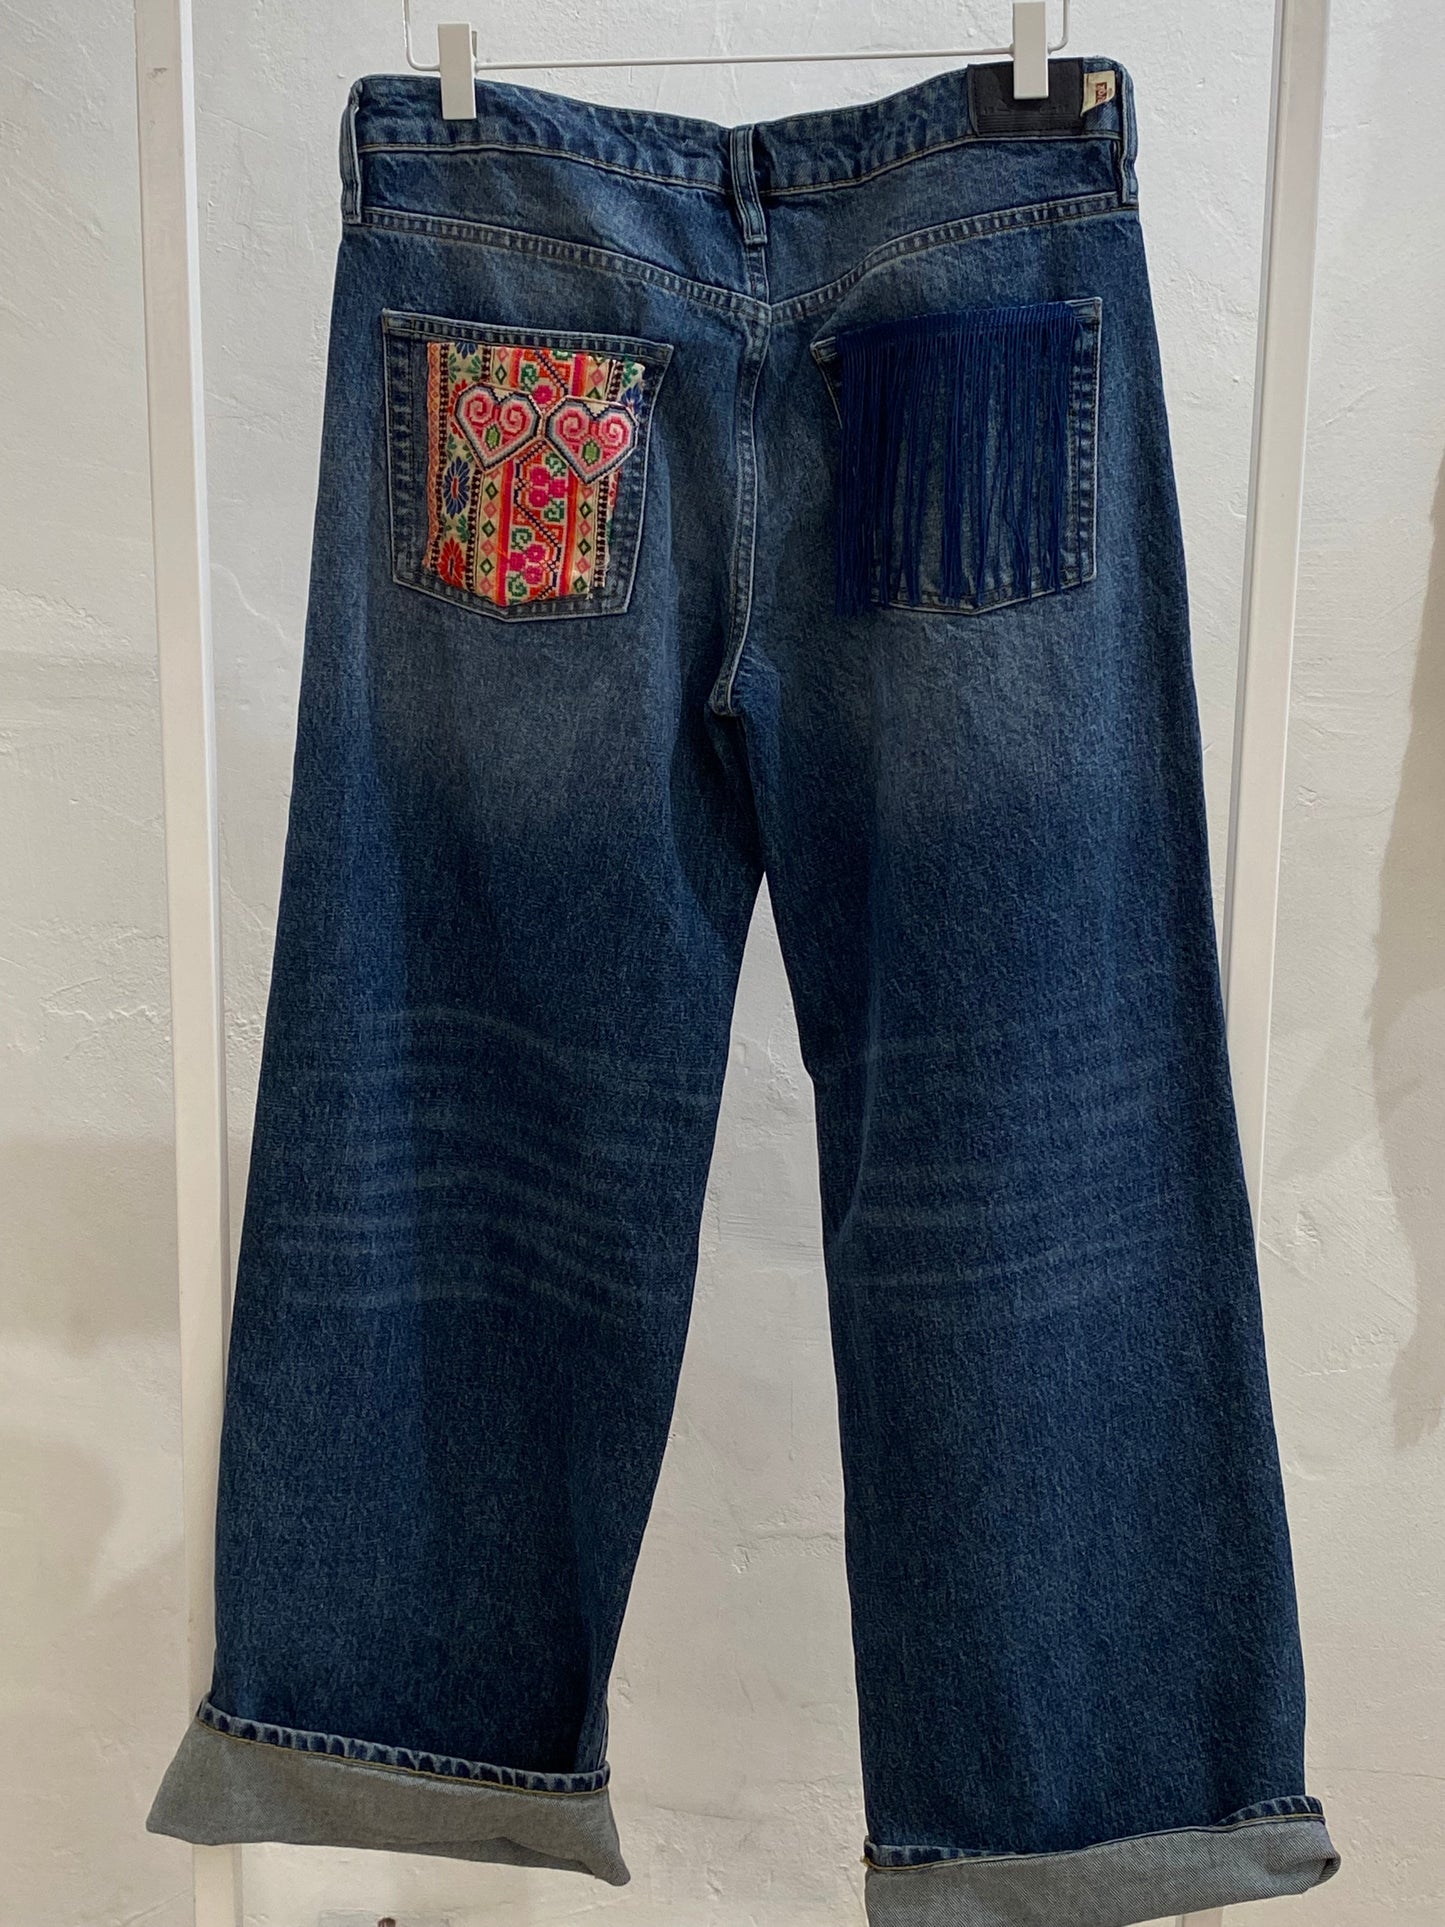 UPCYCLED COLLECTION - Superdry Jeans